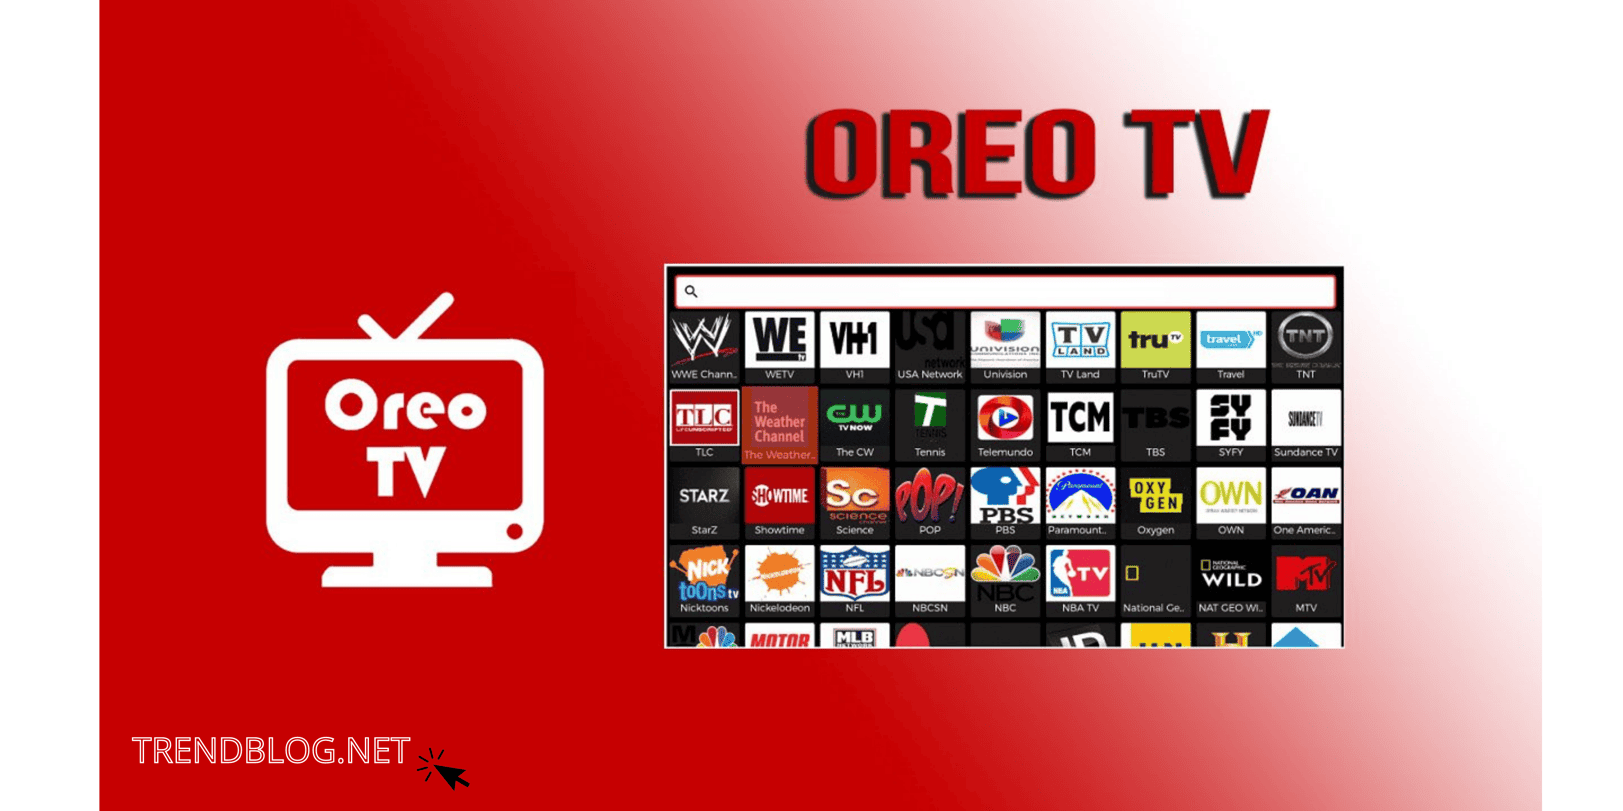  Oreo TV APK Download (Free Latest Version 2021) on Any Device